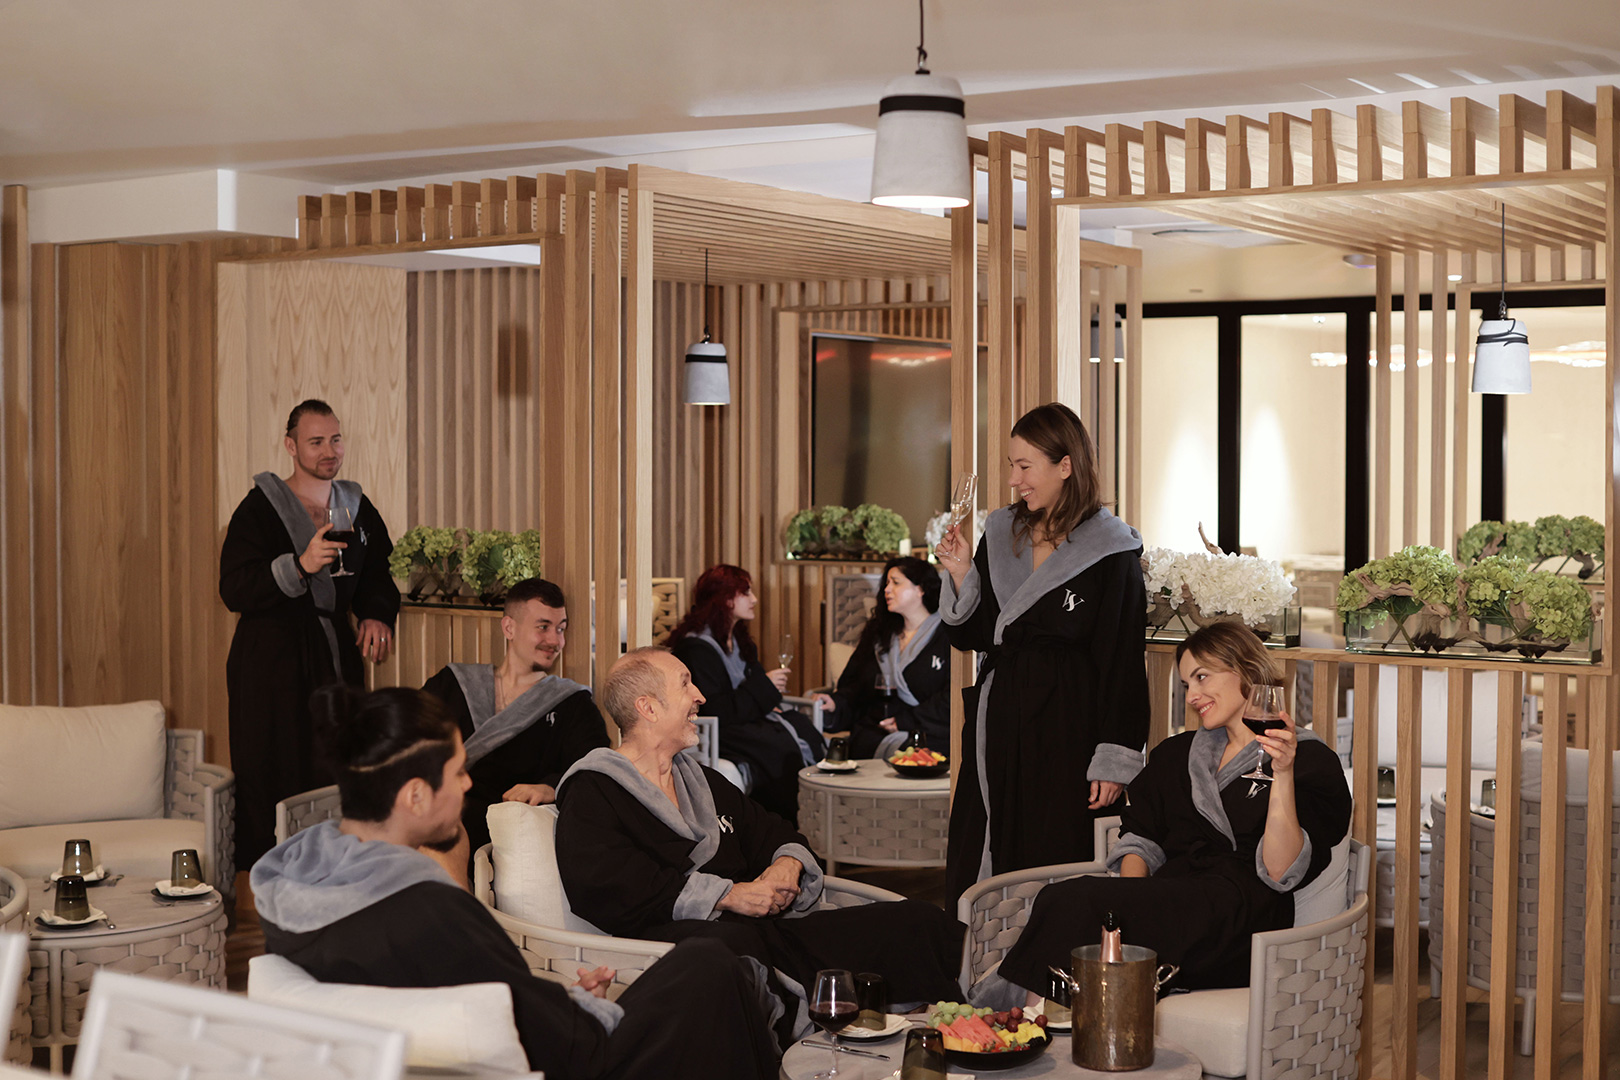 A lively social gathering in a luxurious lounge area, with guests enjoying themselves in a relaxed setting. The room features contemporary decor with plush seating and elegant wooden partitions. Attendees are dressed in spa robes, suggesting a casual yet exclusive event, with waitstaff providing attentive service.